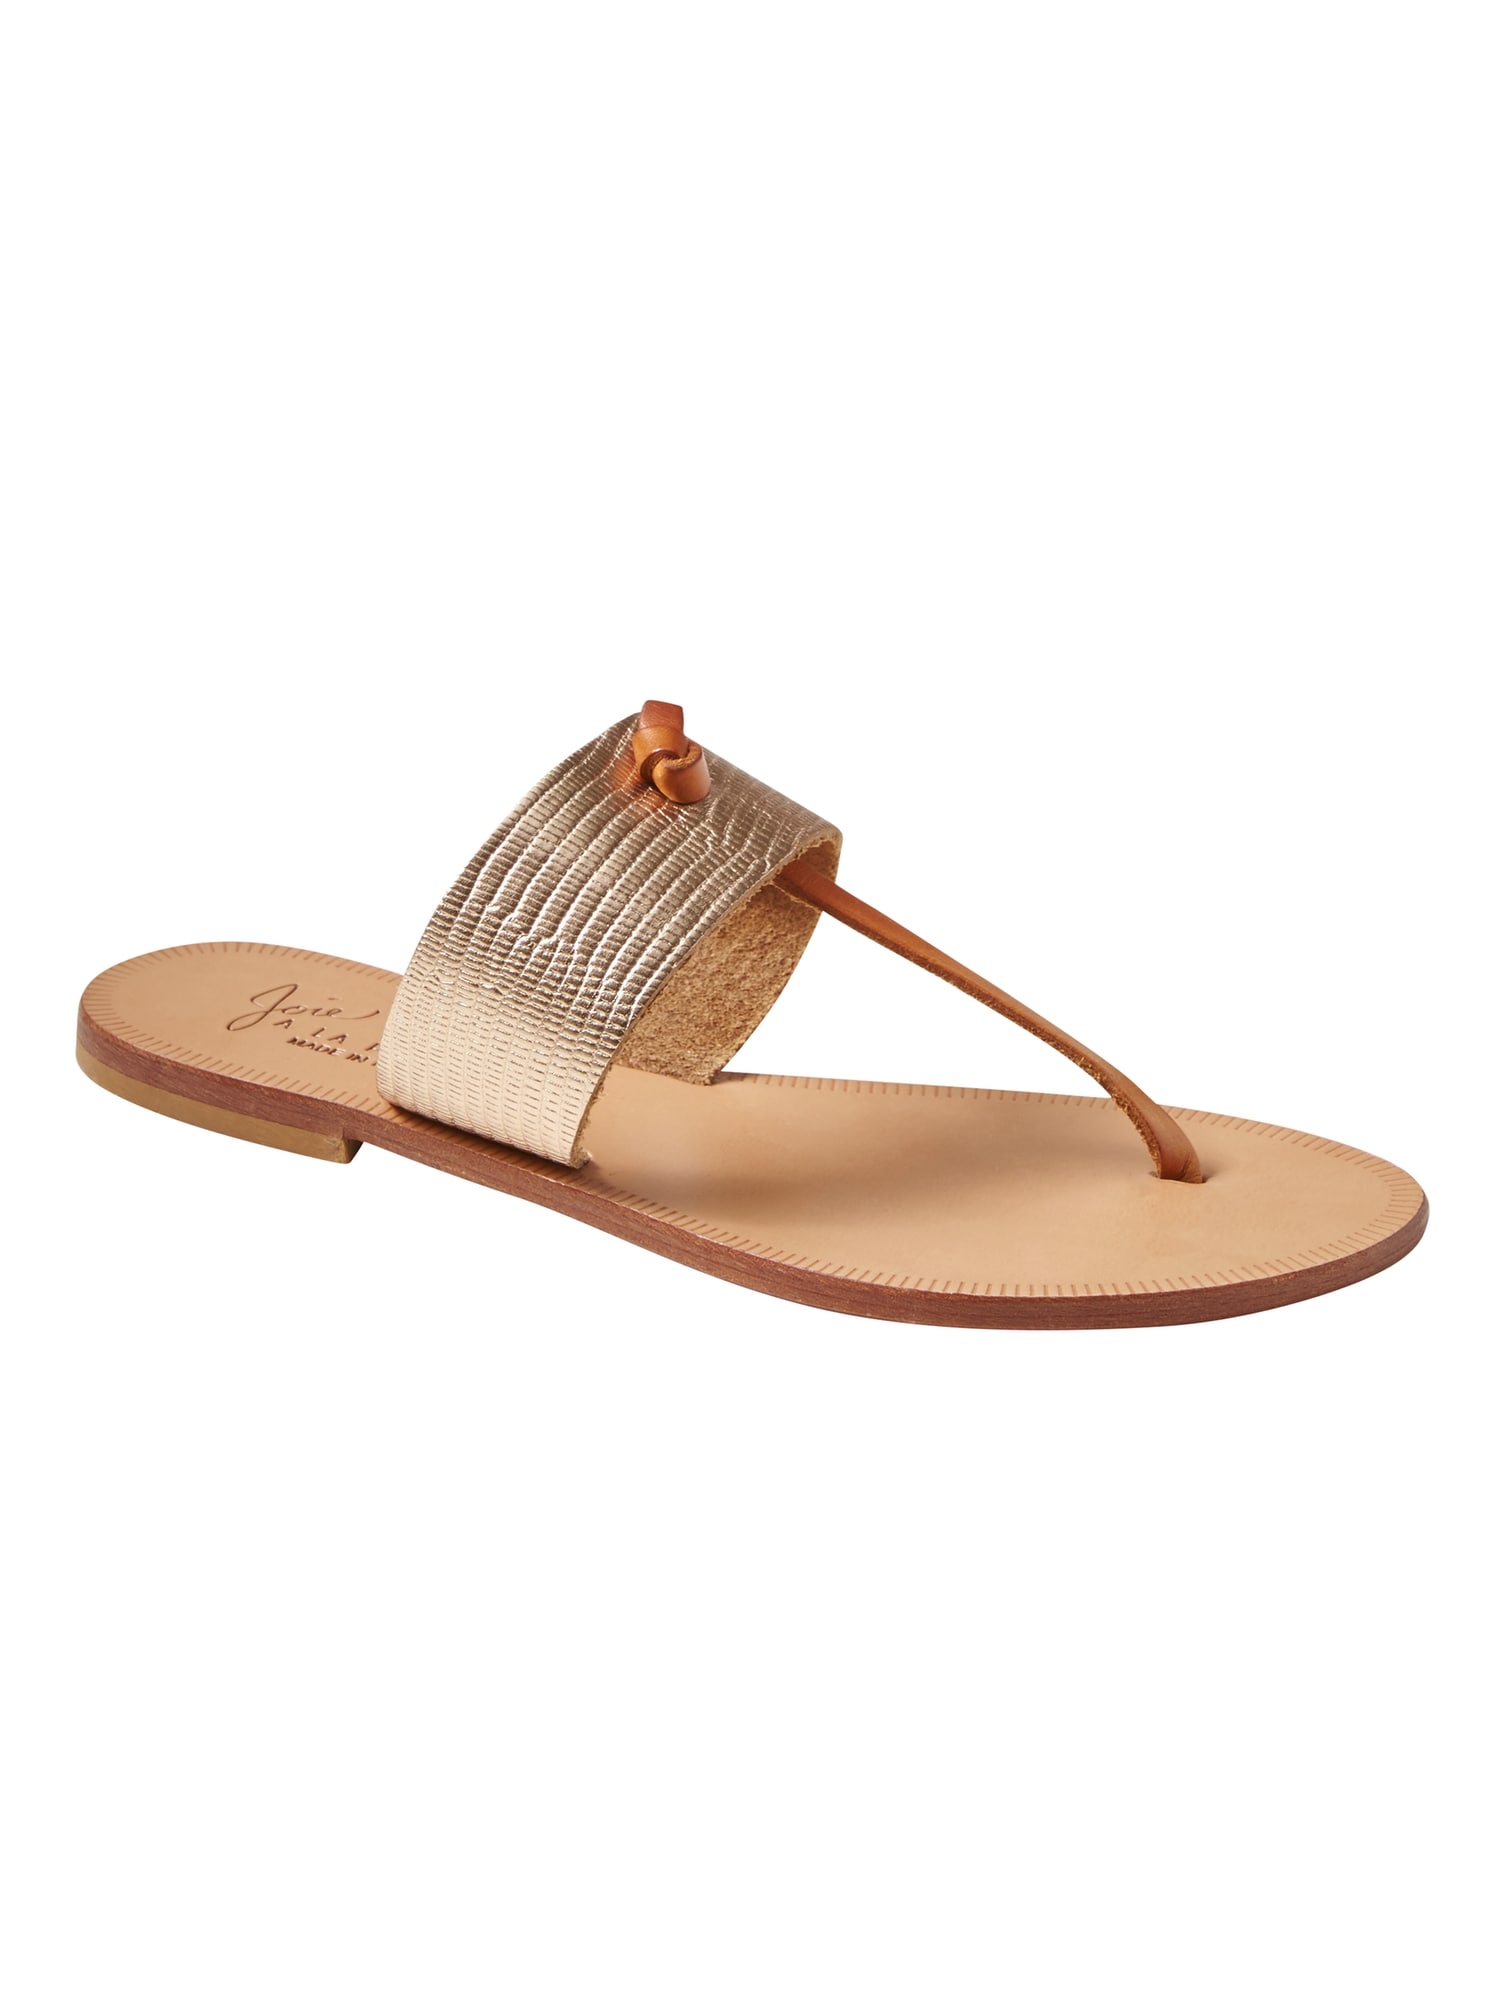 Cute Women's Sandals - 2018 Trending Spring/Summer Sandals -- Mommy Fashion Blogger - The Overwhelmed Mommy